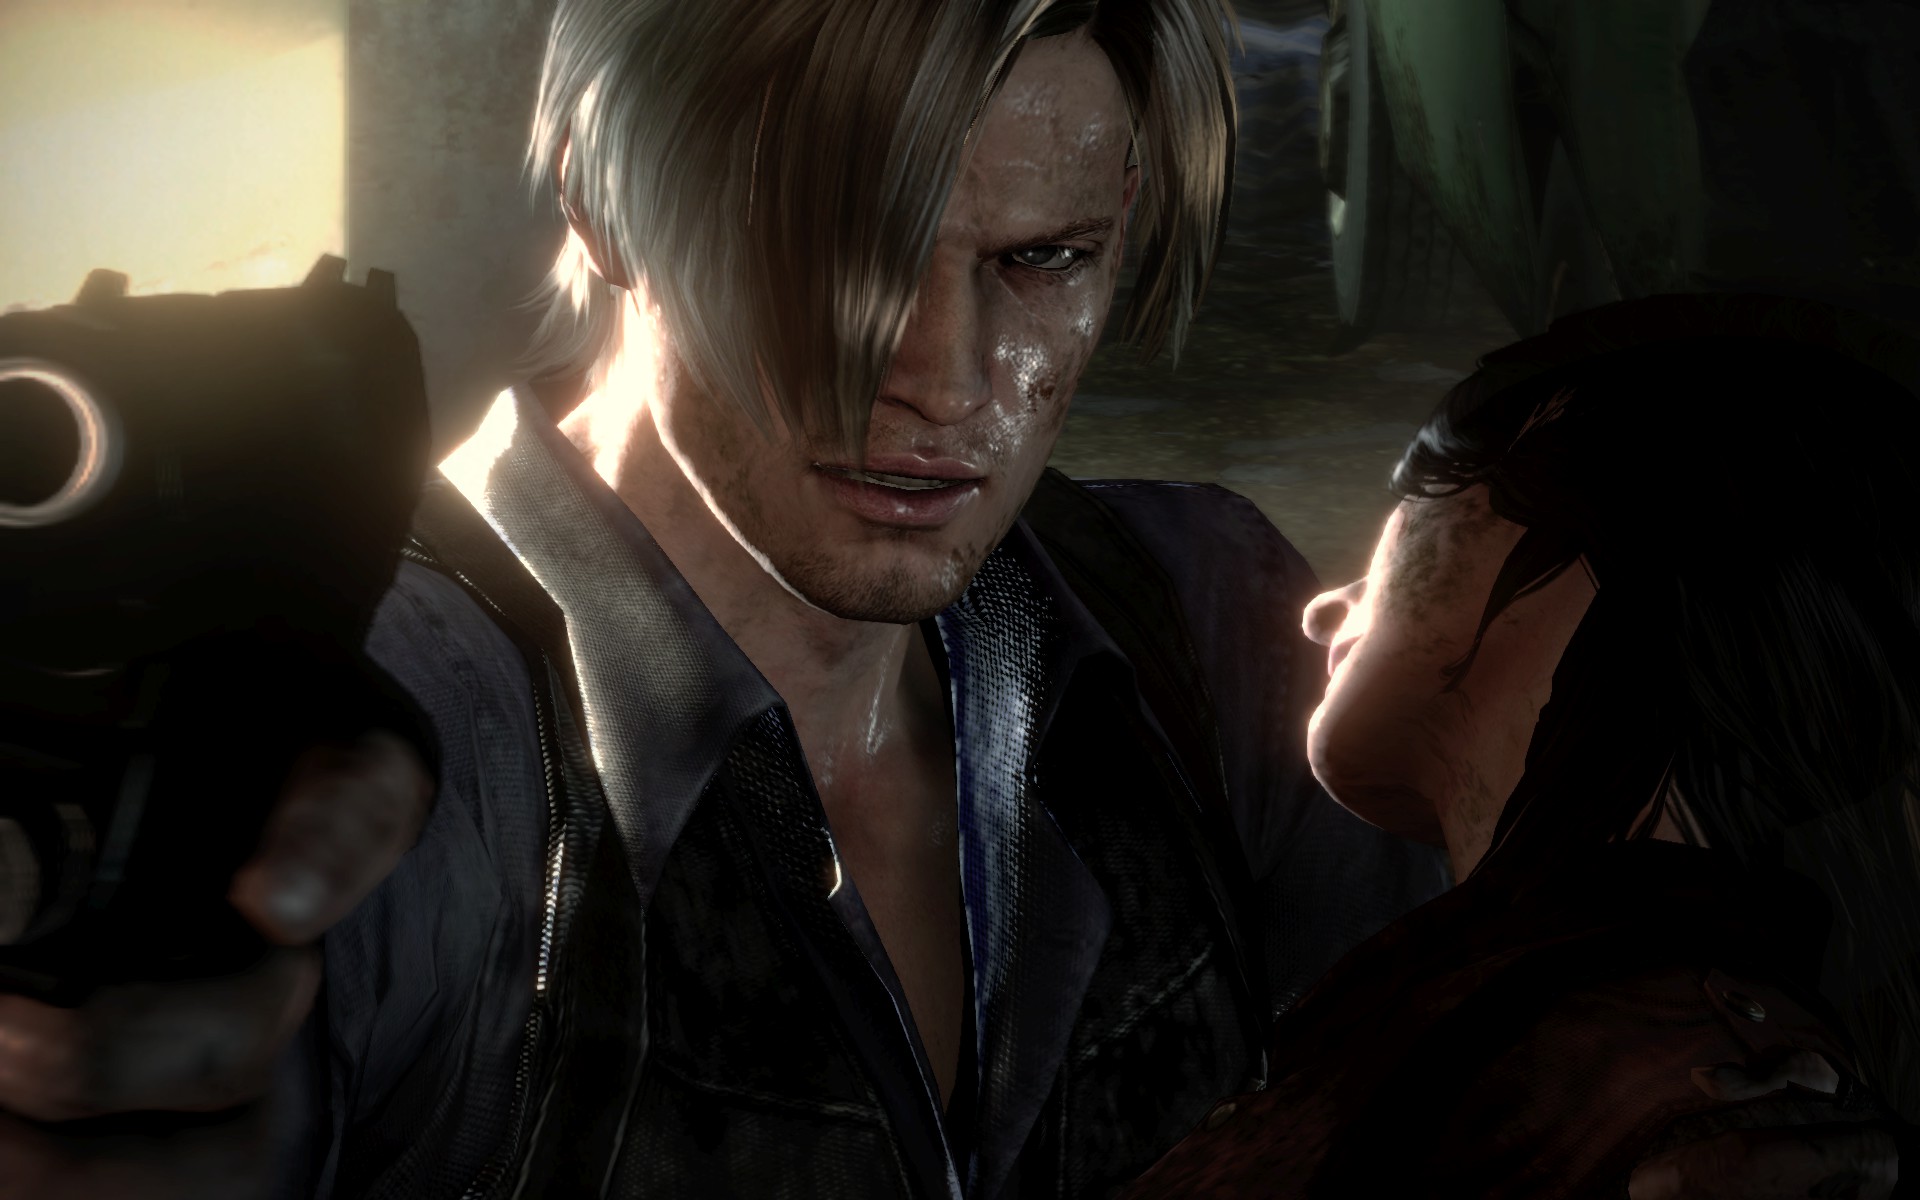 10 Clips of Resident Evil 6 The Final Chapter